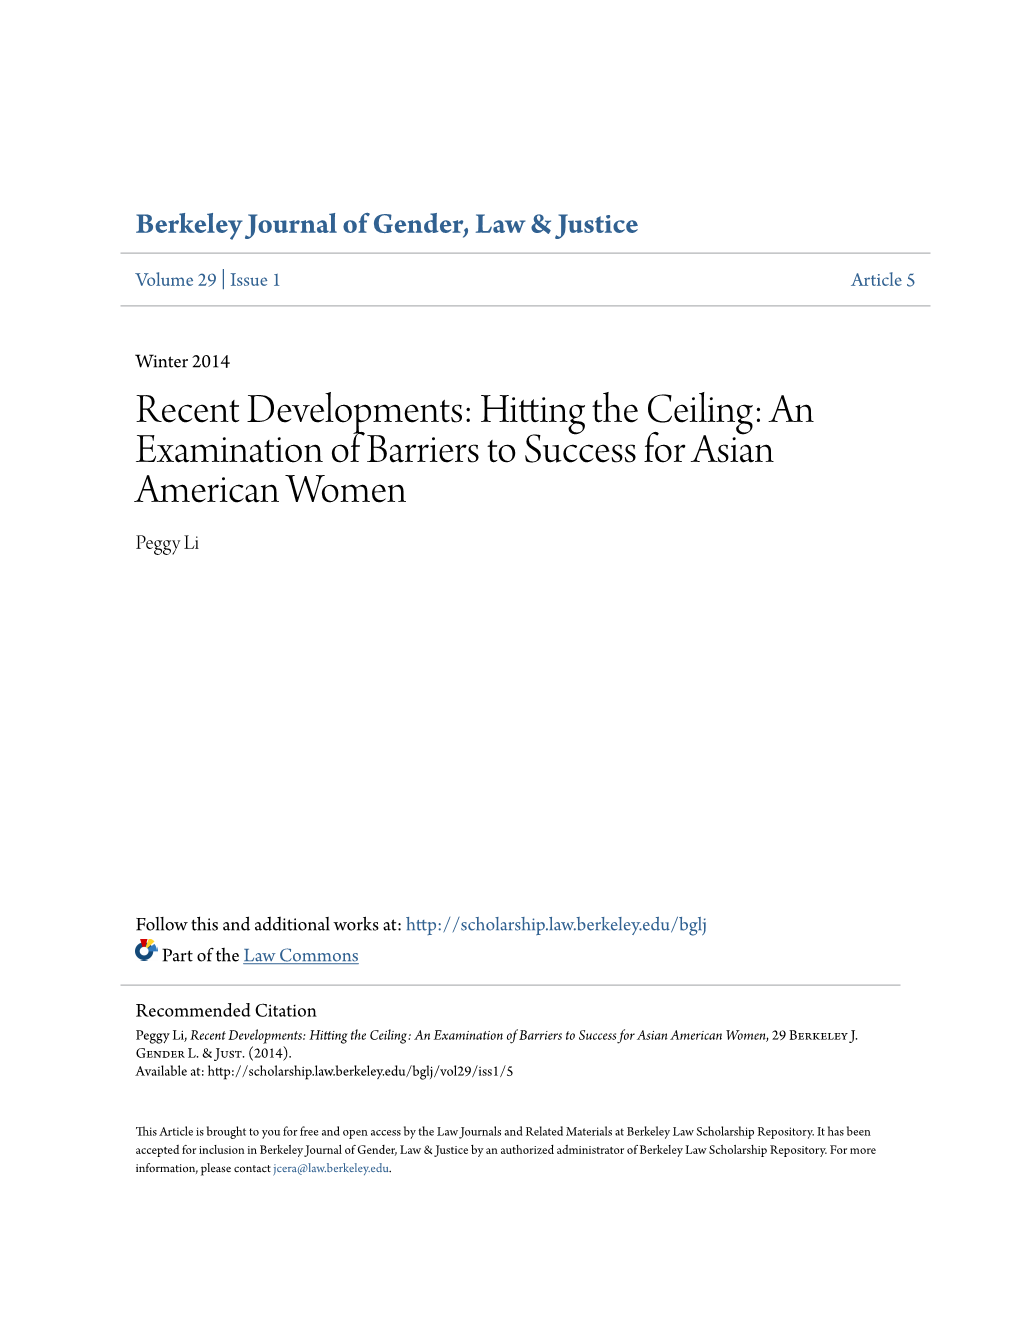 An Examination of Barriers to Success for Asian American Women Peggy Li